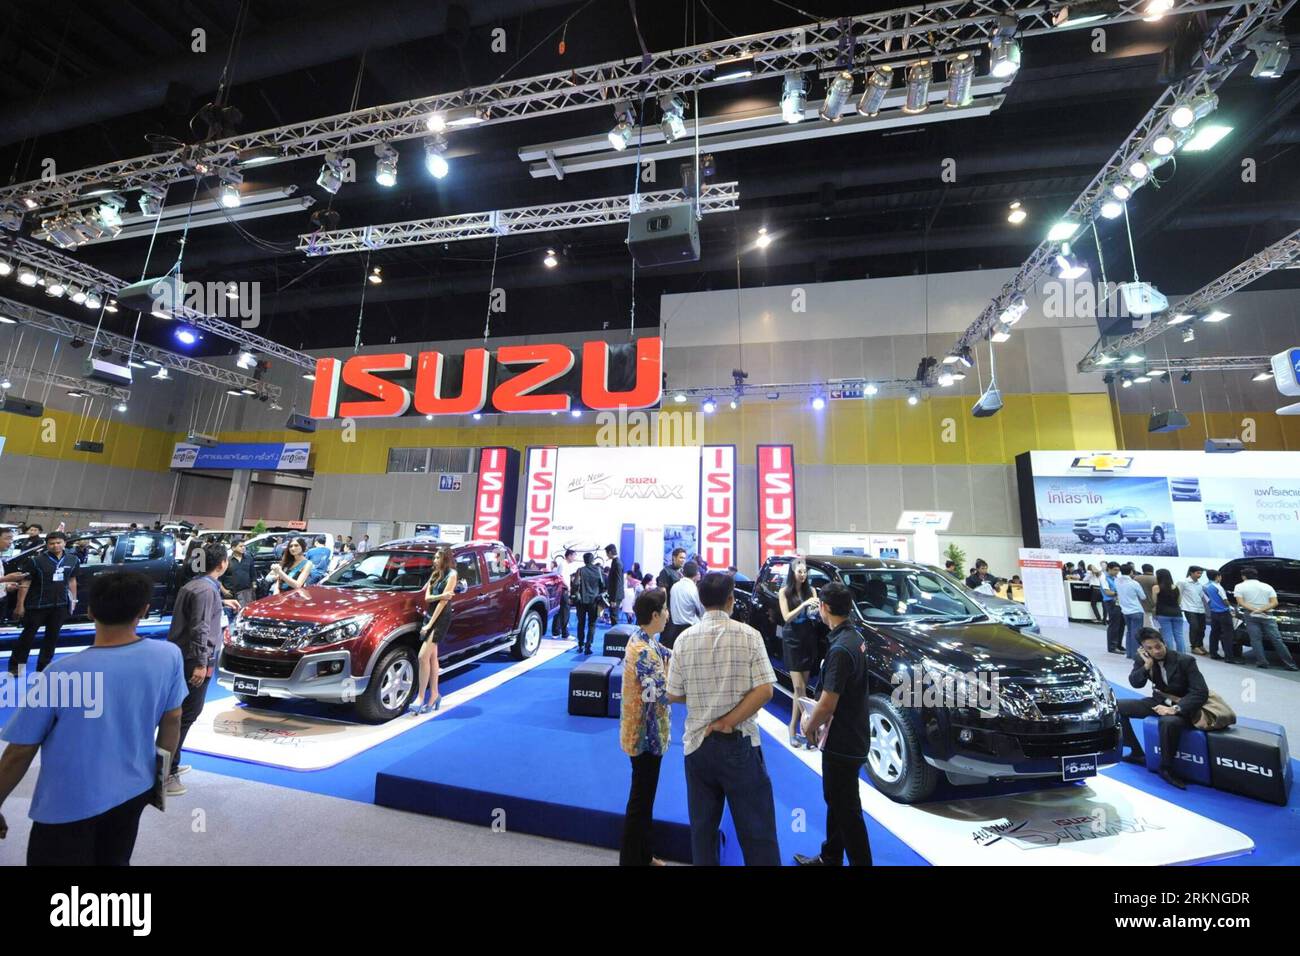 Bildnummer: 57121463  Datum: 29.02.2012  Copyright: imago/Xinhua (120229) -- BANGKOK, Feb. 29, 2012 (Xinhua) -- visit Thailand s First Auto Show held at BITEC Bangna Exhibition in Bangkok, Thailand on Feb 29, 2012. Thailand s First Auto Show was held Wednesday morning under the government s car policy which provides tax-cut for first time car buyer, with 18 car brands and 20 used car vendors participating. (Xinhua/Rachen Sageamsak)(axy) THAILAND-BANGKOK-AUTO SHOW PUBLICATIONxNOTxINxCHN Wirtschaft Autoindustrie Auto Messe Automesse xbs x2x 2012 quer o0 Isuzu     57121463 Date 29 02 2012 Copyrig Stock Photo